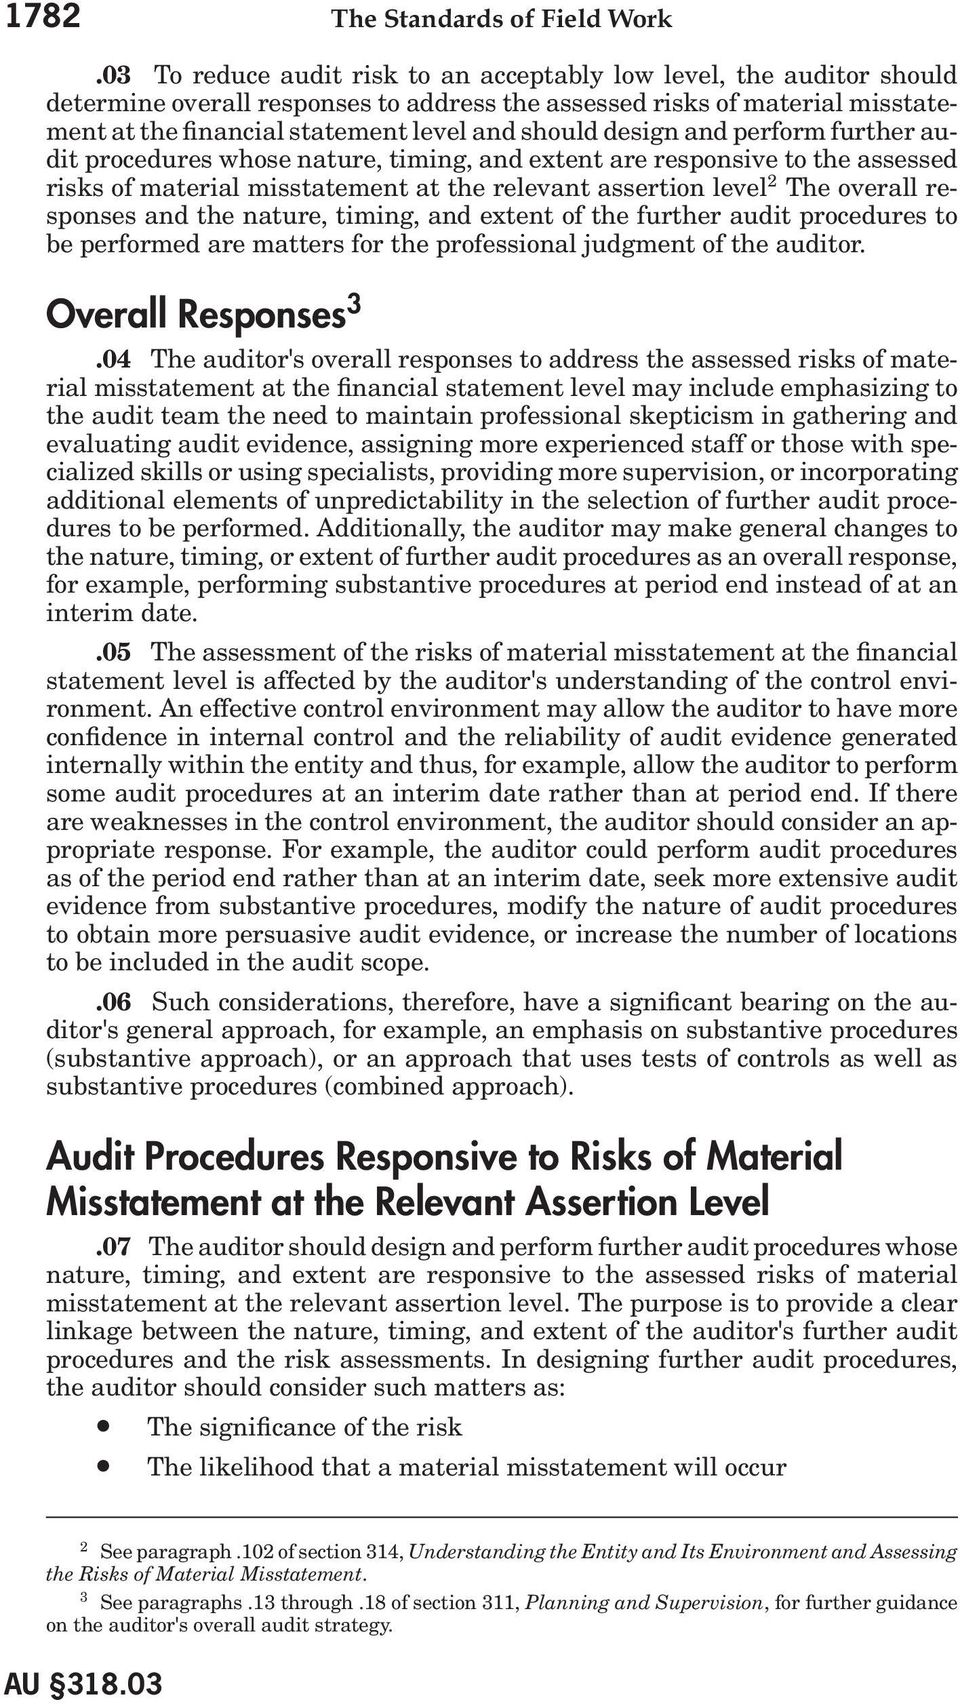 design and perform further audit procedures whose nature, timing, and extent are responsive to the assessed risks of material misstatement at the relevant assertion level 2 The overall responses and